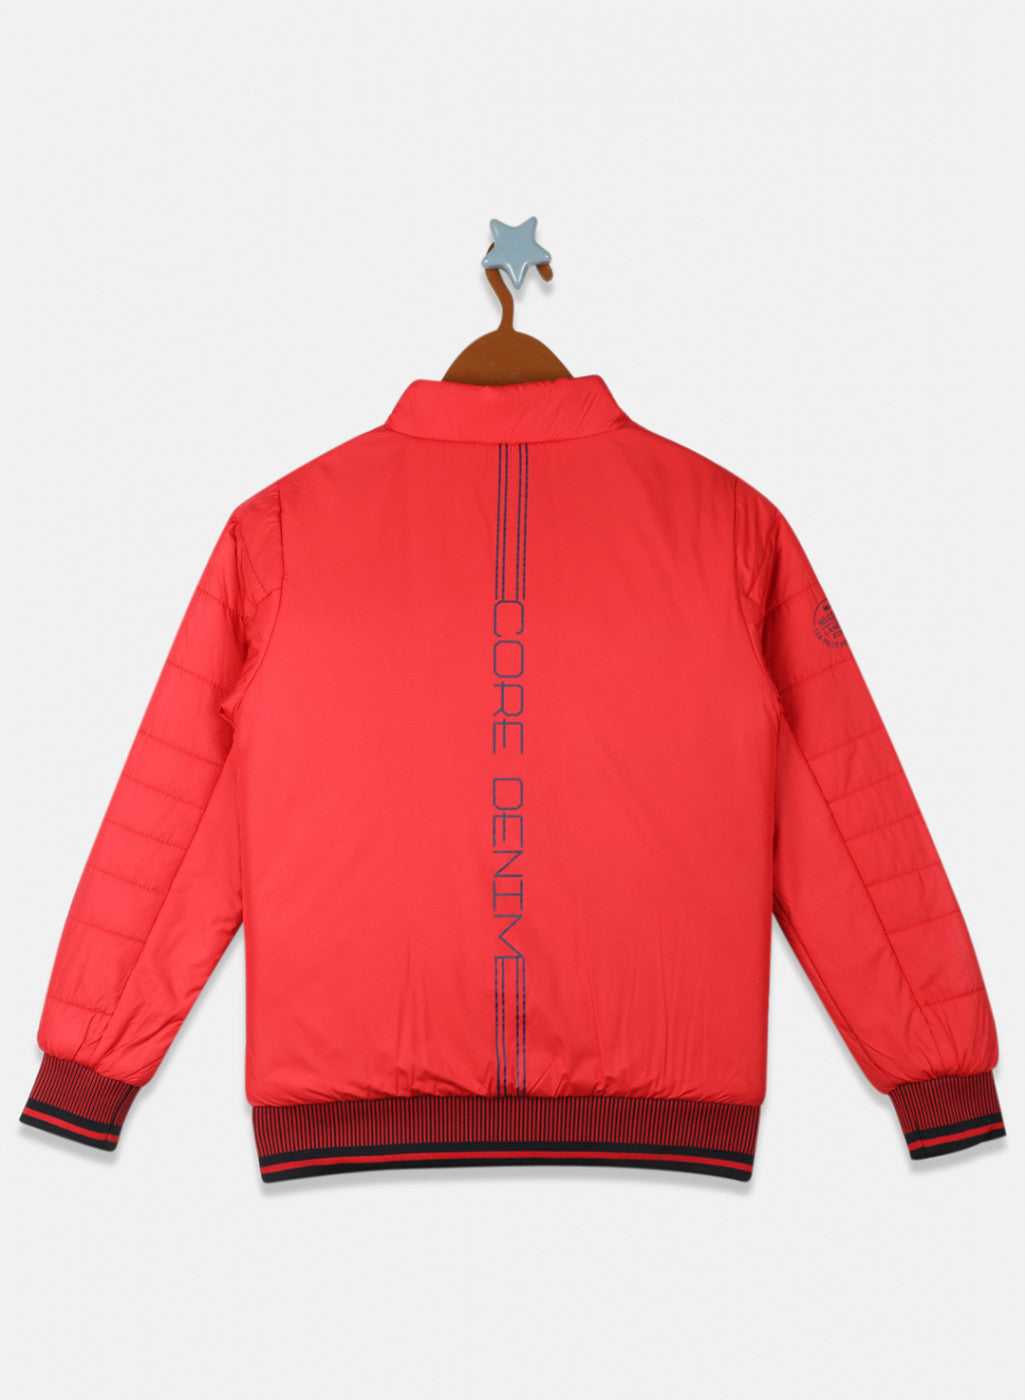 Boys Red Solid Jacket